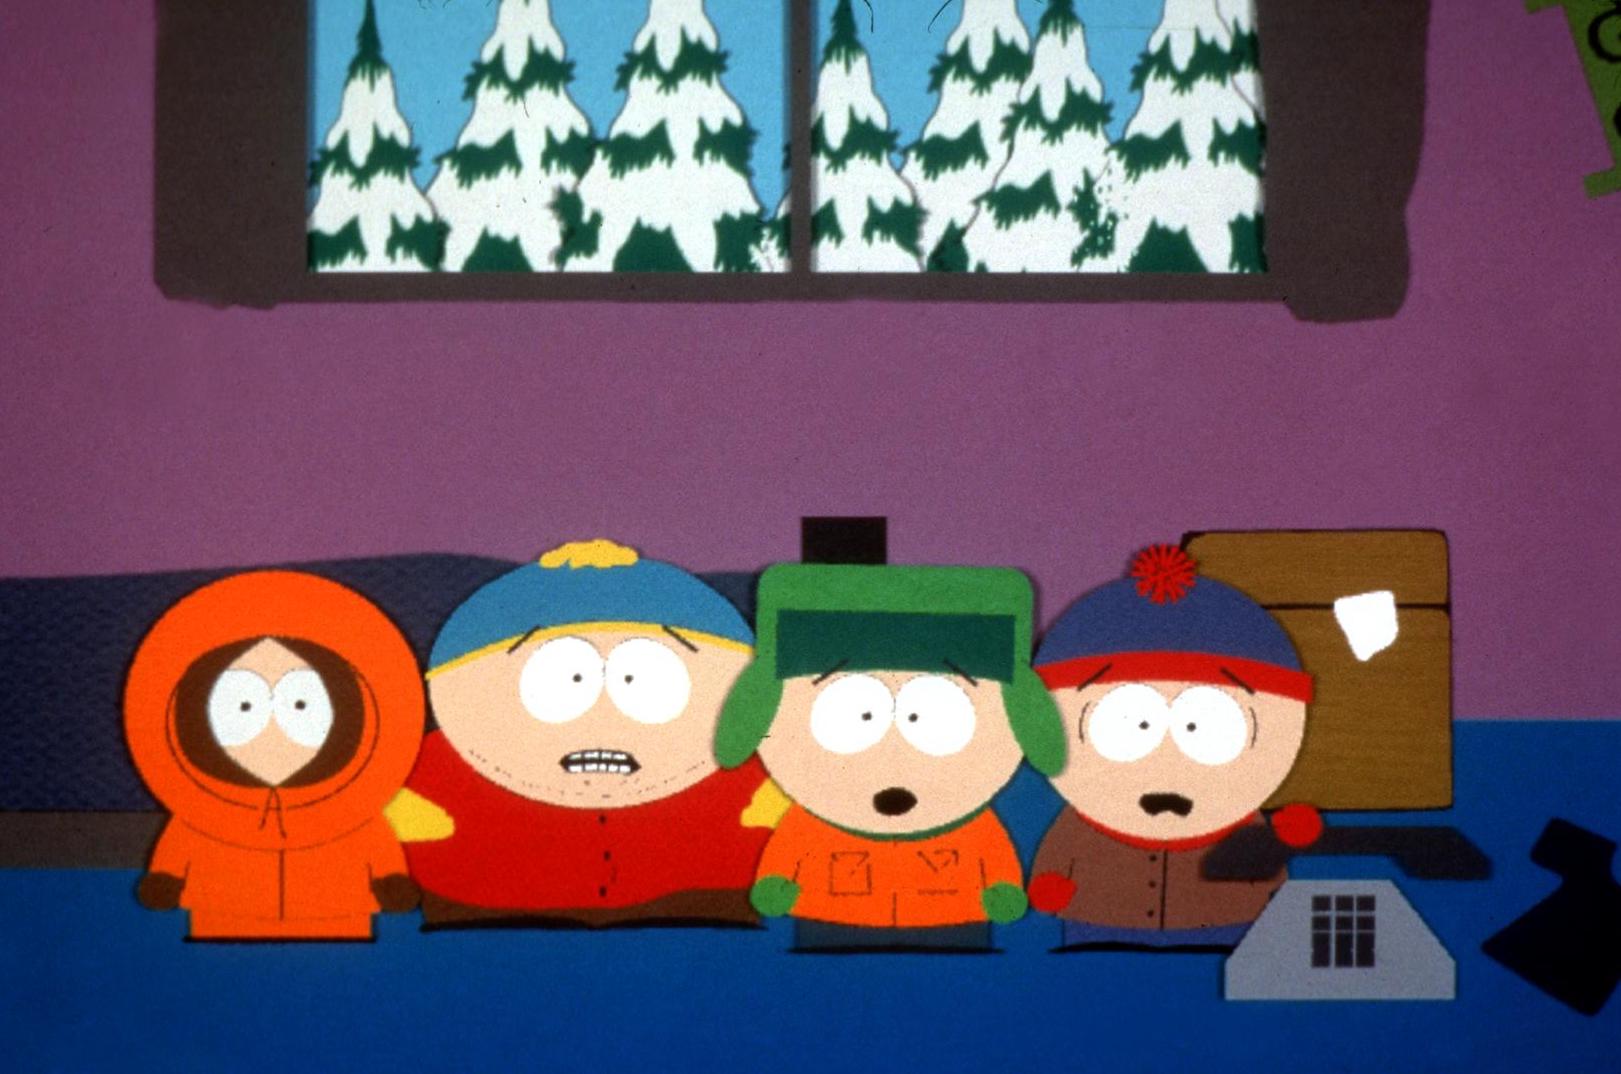 South Park Mall, South Park Character / Location / User talk etc